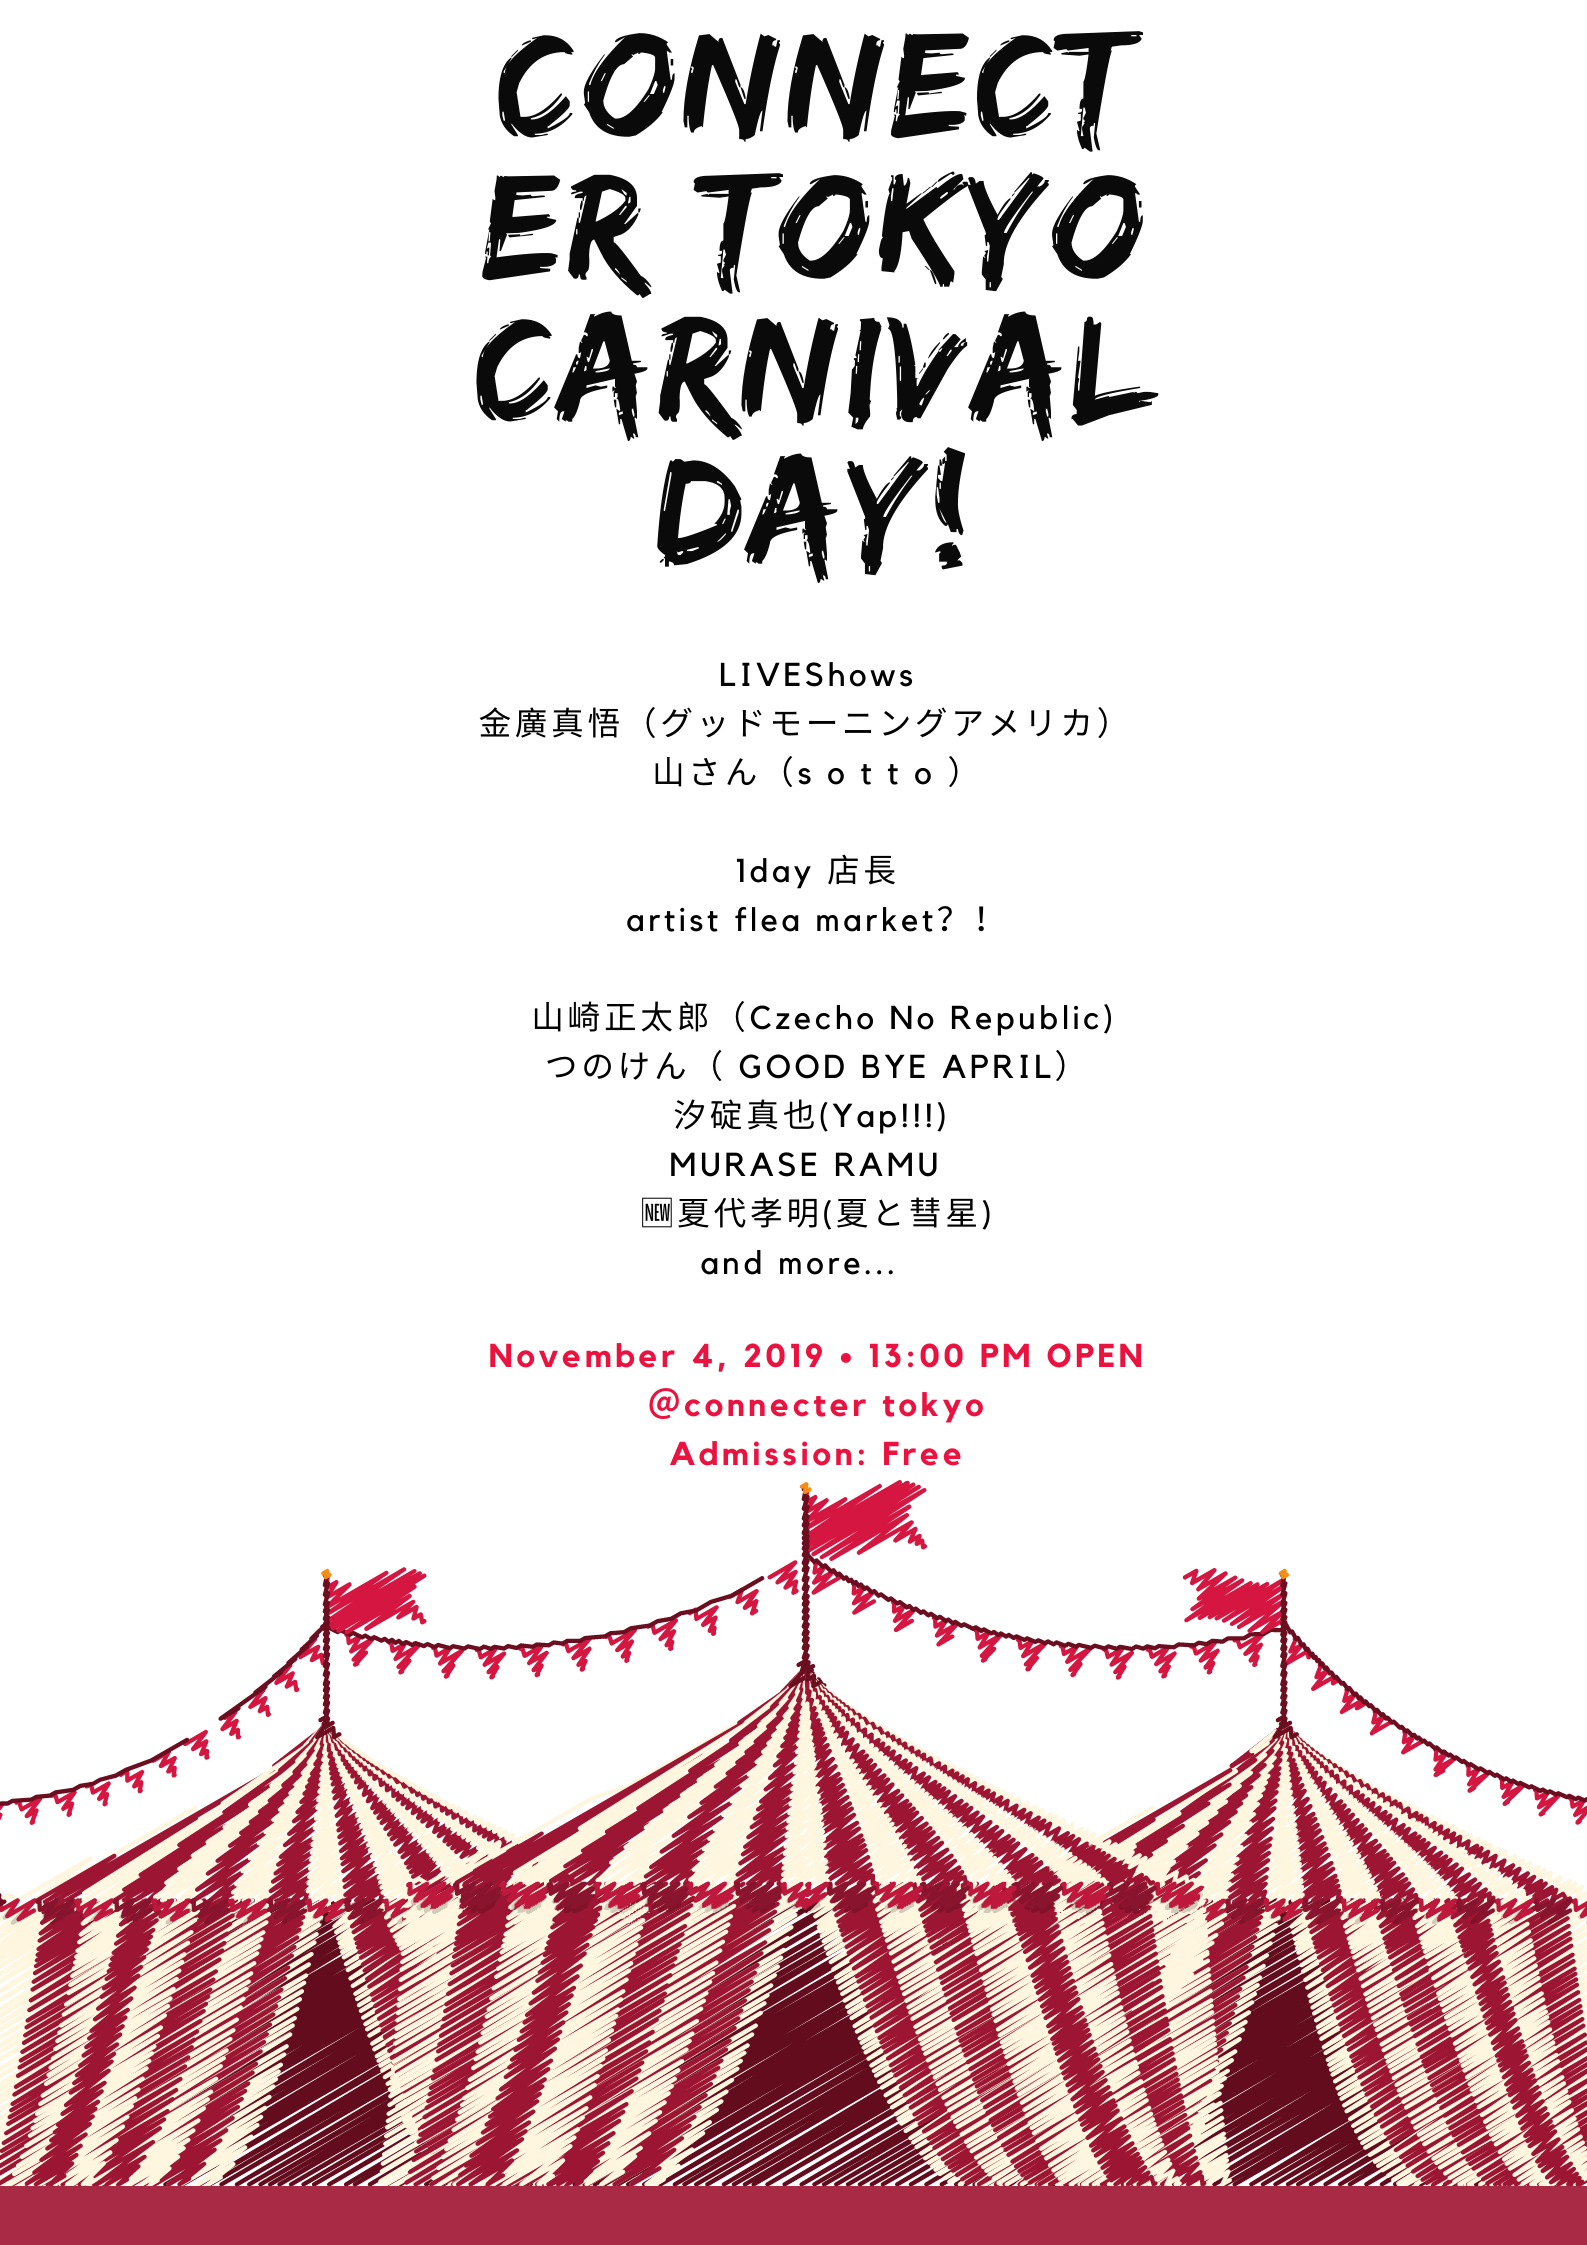 【event】Connecter Tokyo carnival  day!!